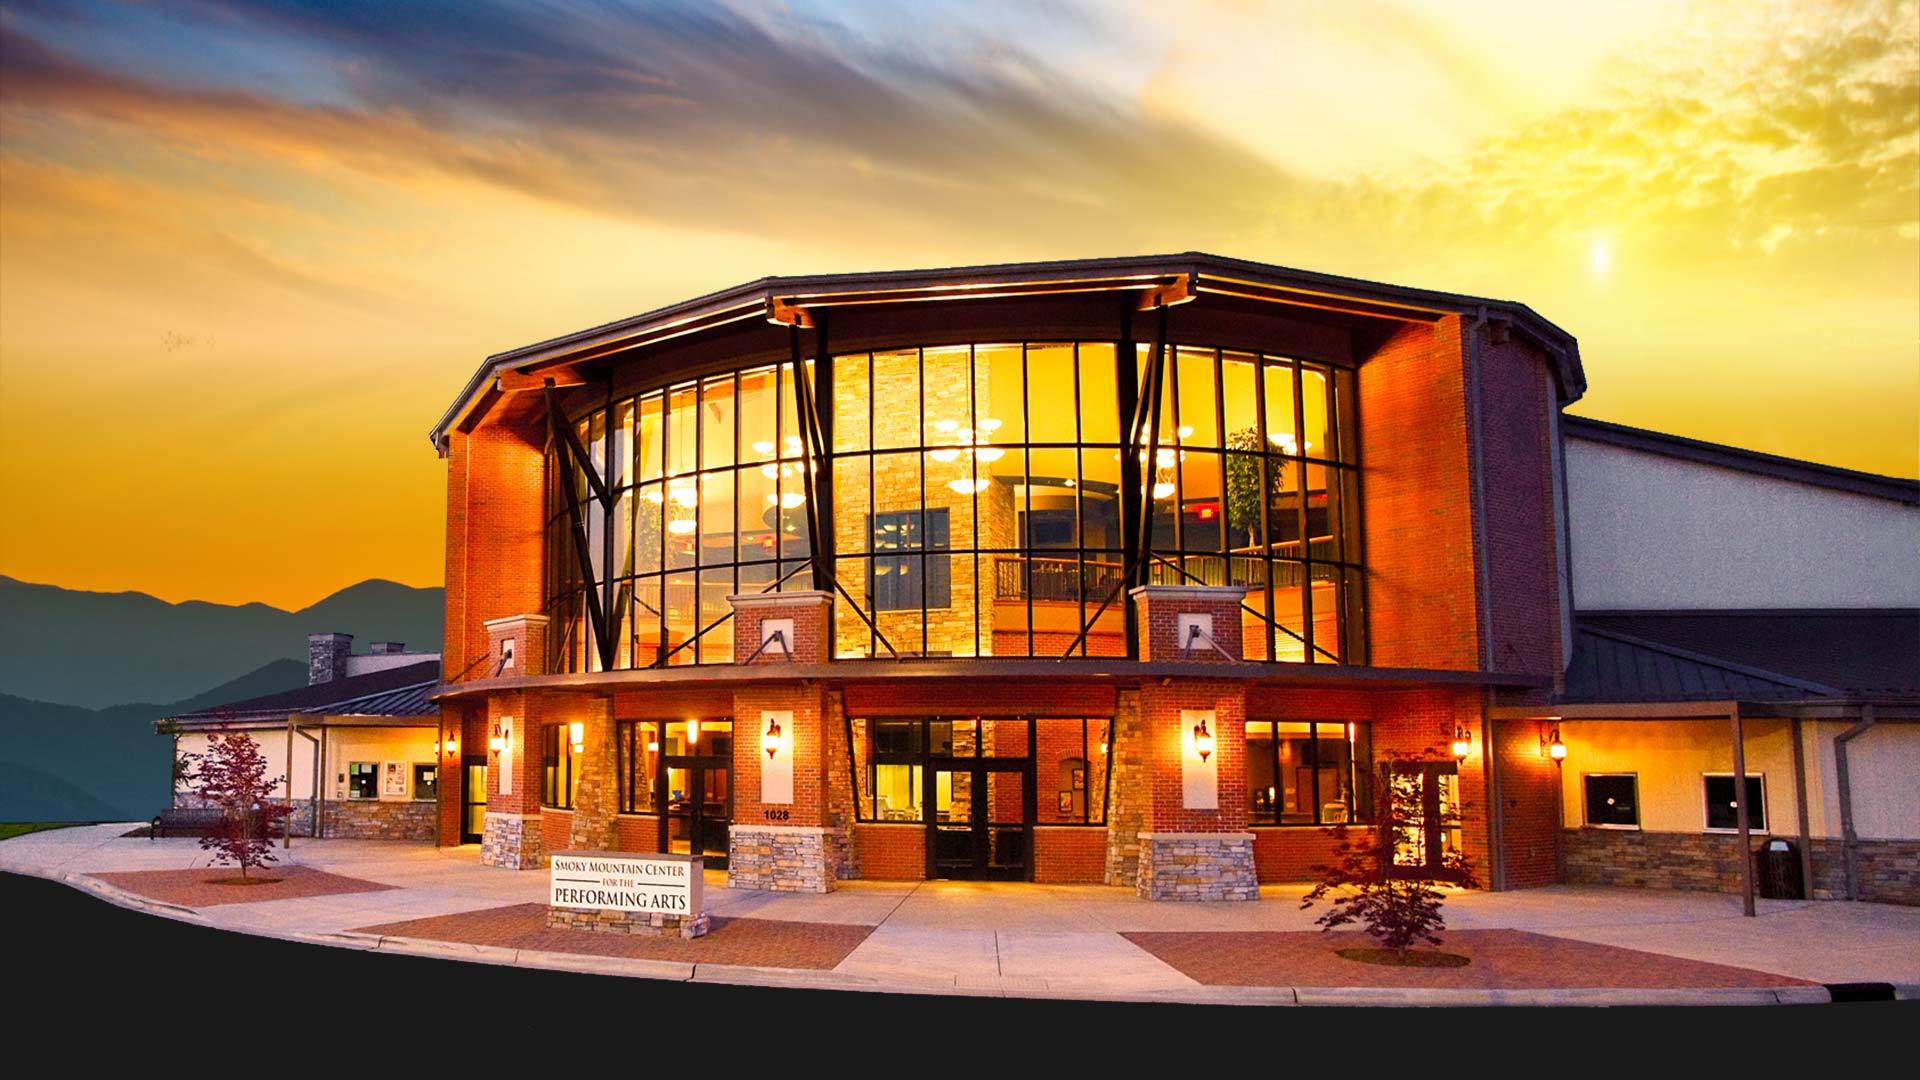 Smoky Mountain Center for the Performing Arts